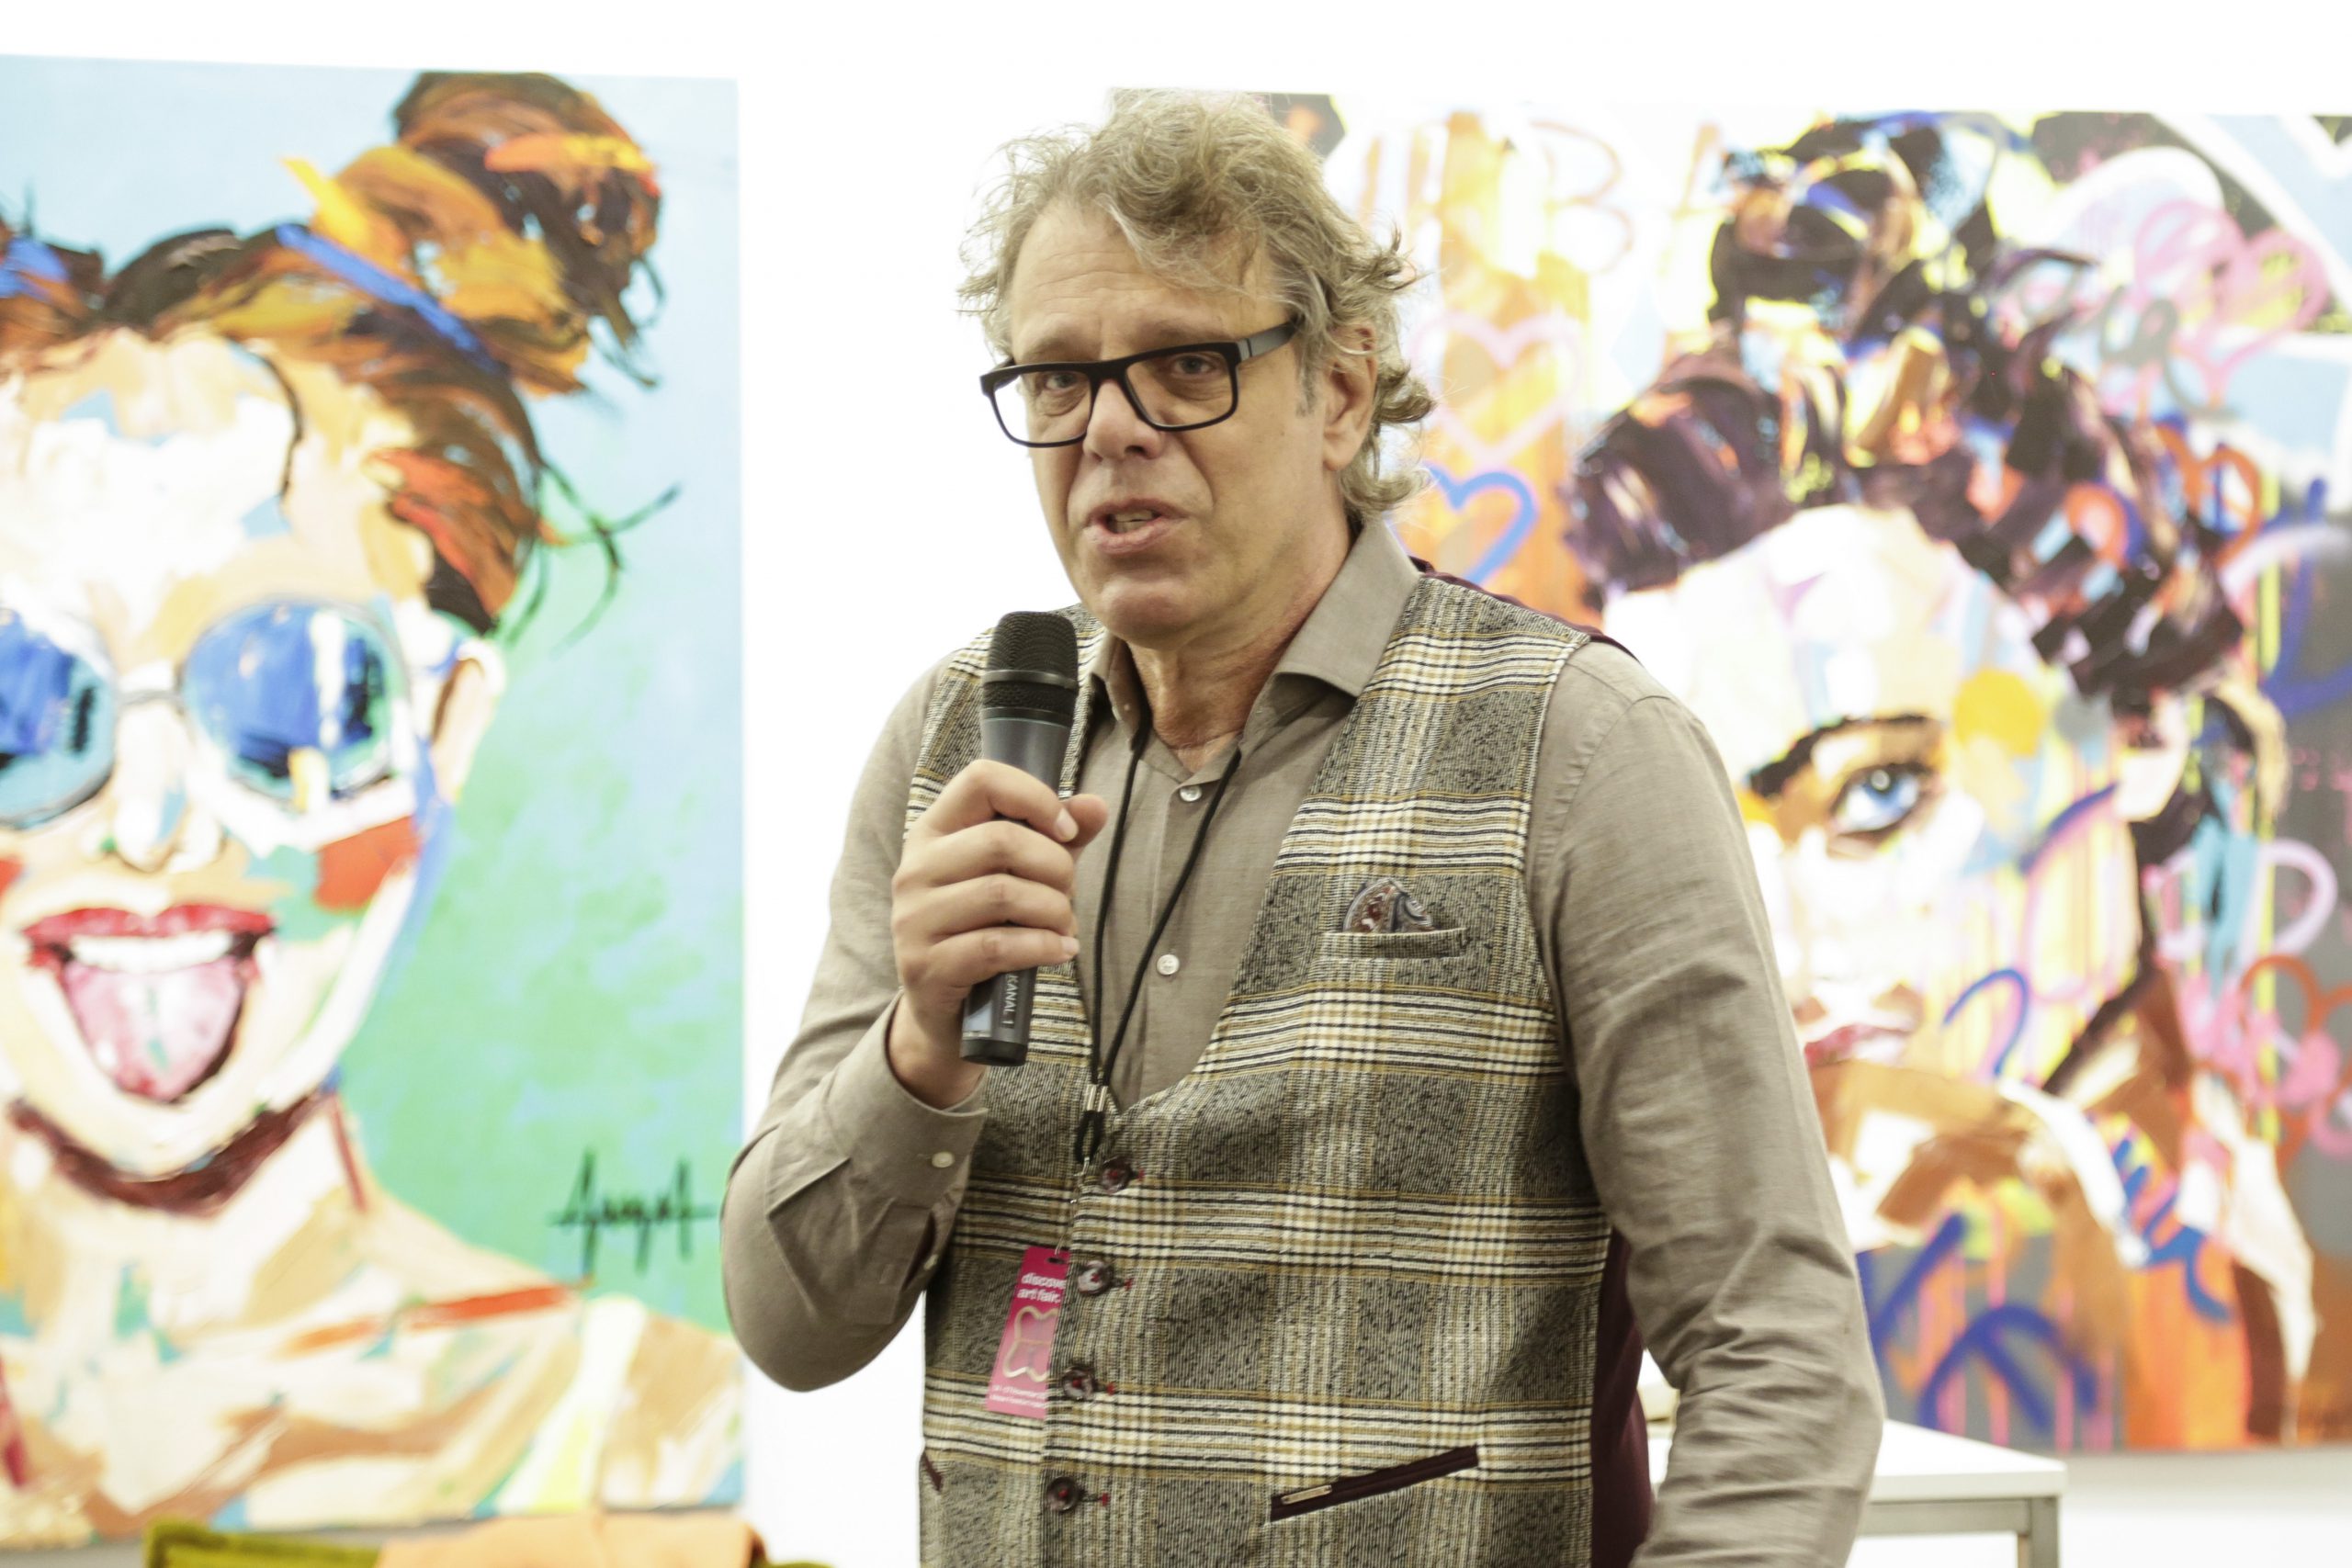 Gérard Margaritis director of the 30works gallery speaks at the art fair holding a mic to his mouth